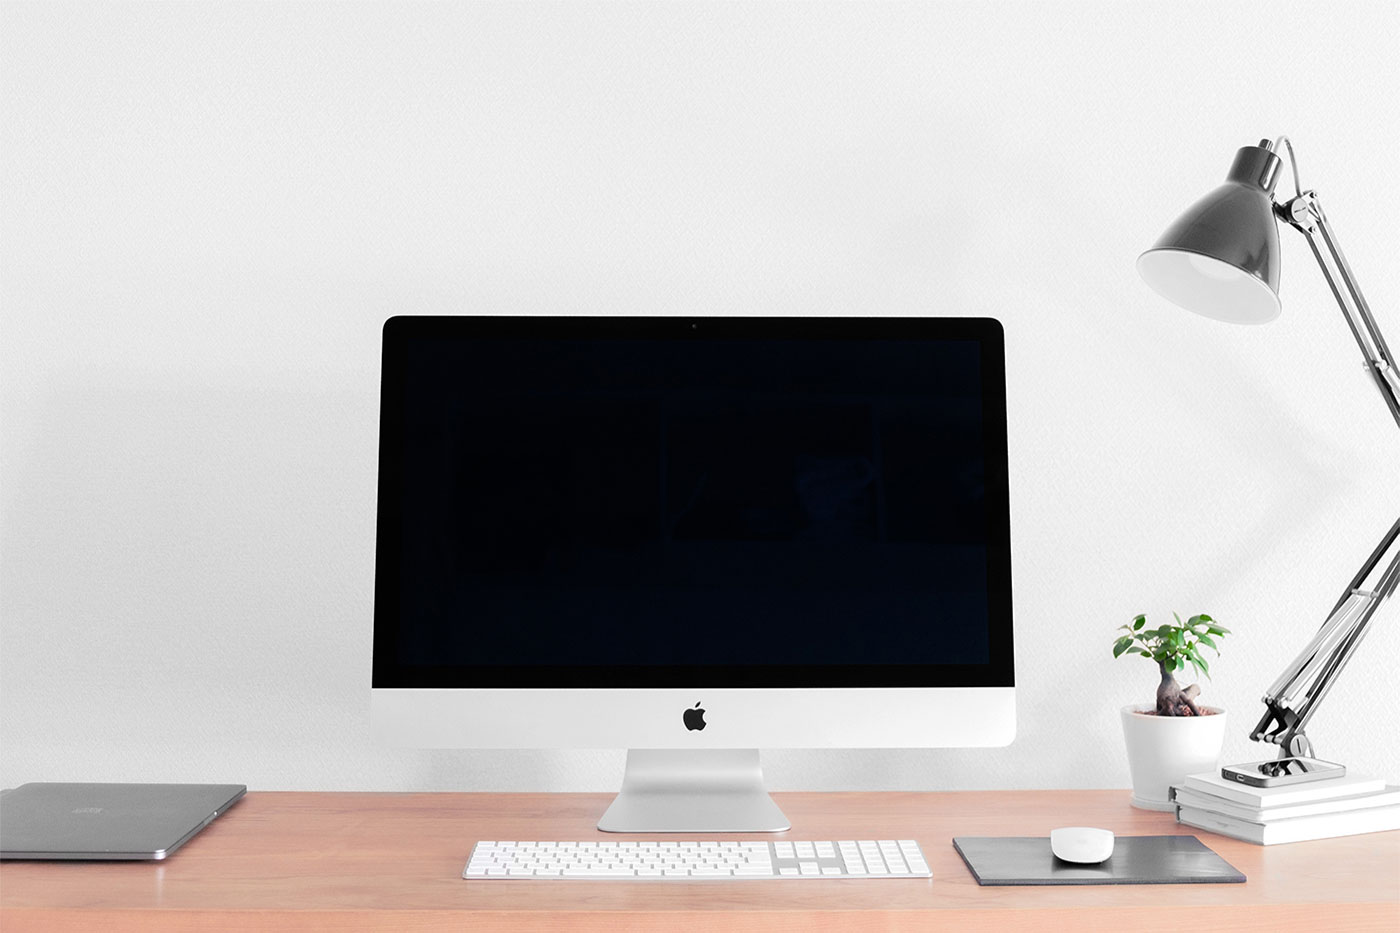 Mockup Featuring Realistic iMac on a Desk Next to a Lamp and a Plant FREE PSD